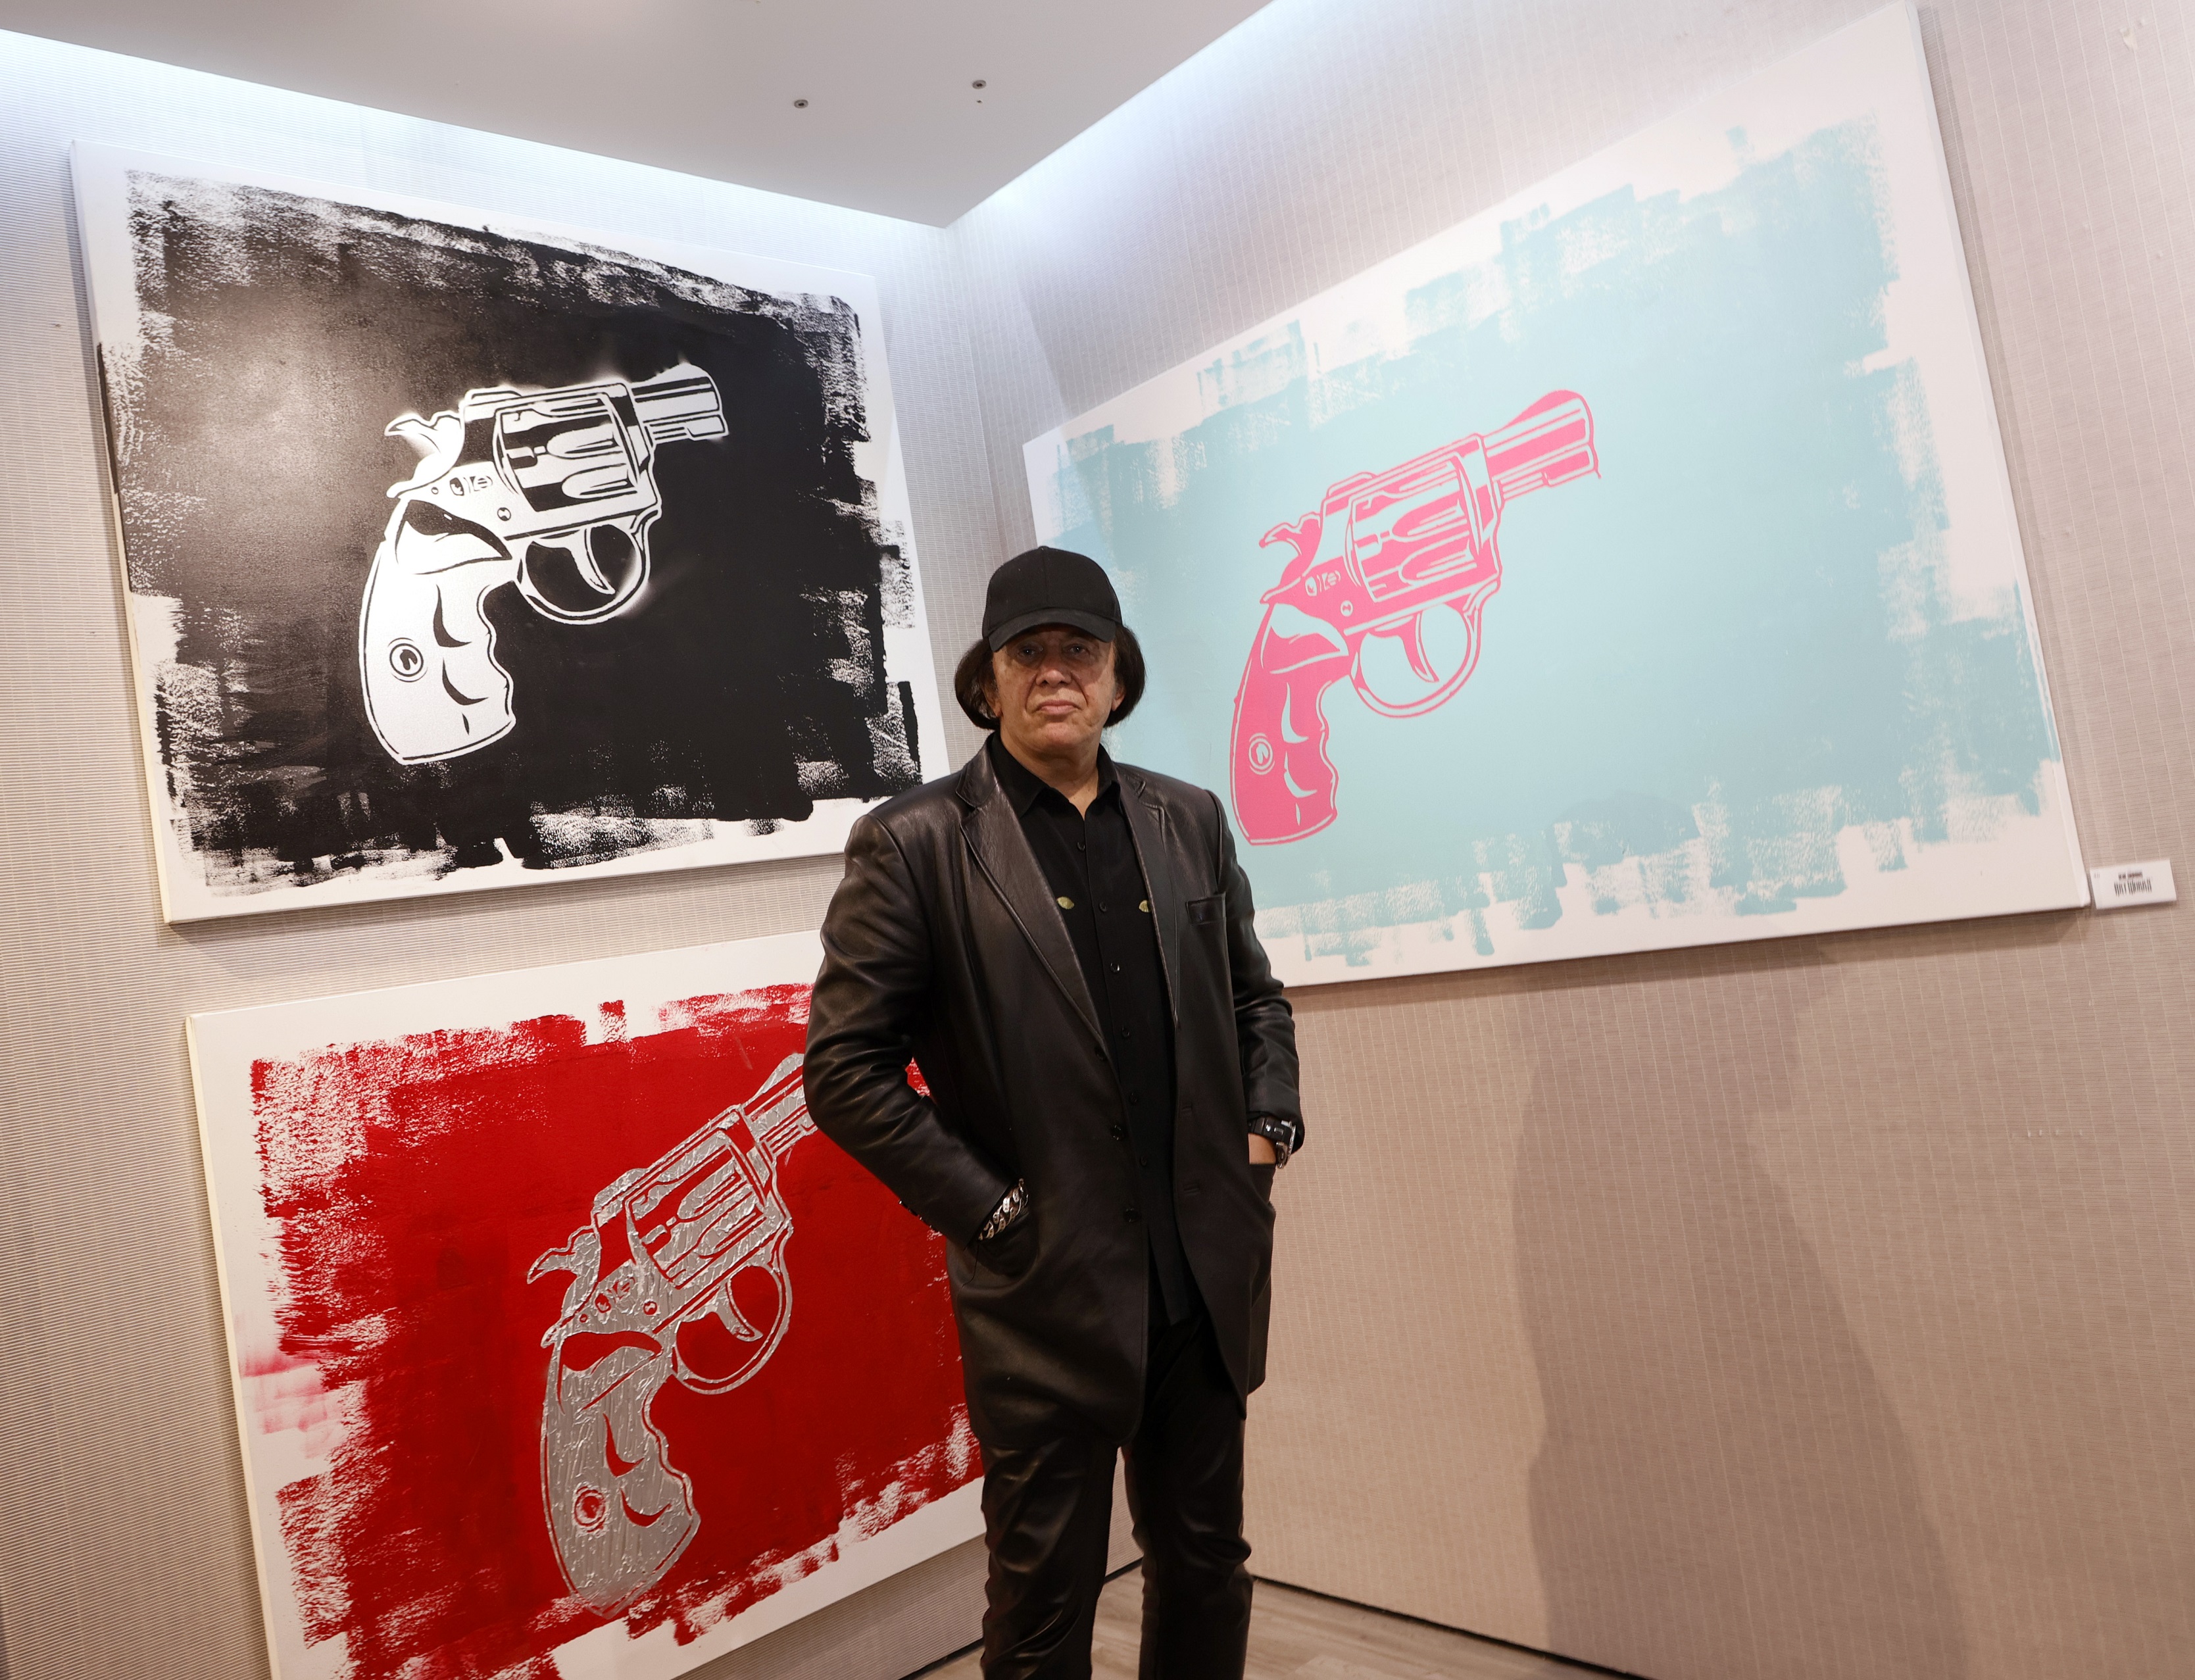 Gene Simmons with paintings of revolvers